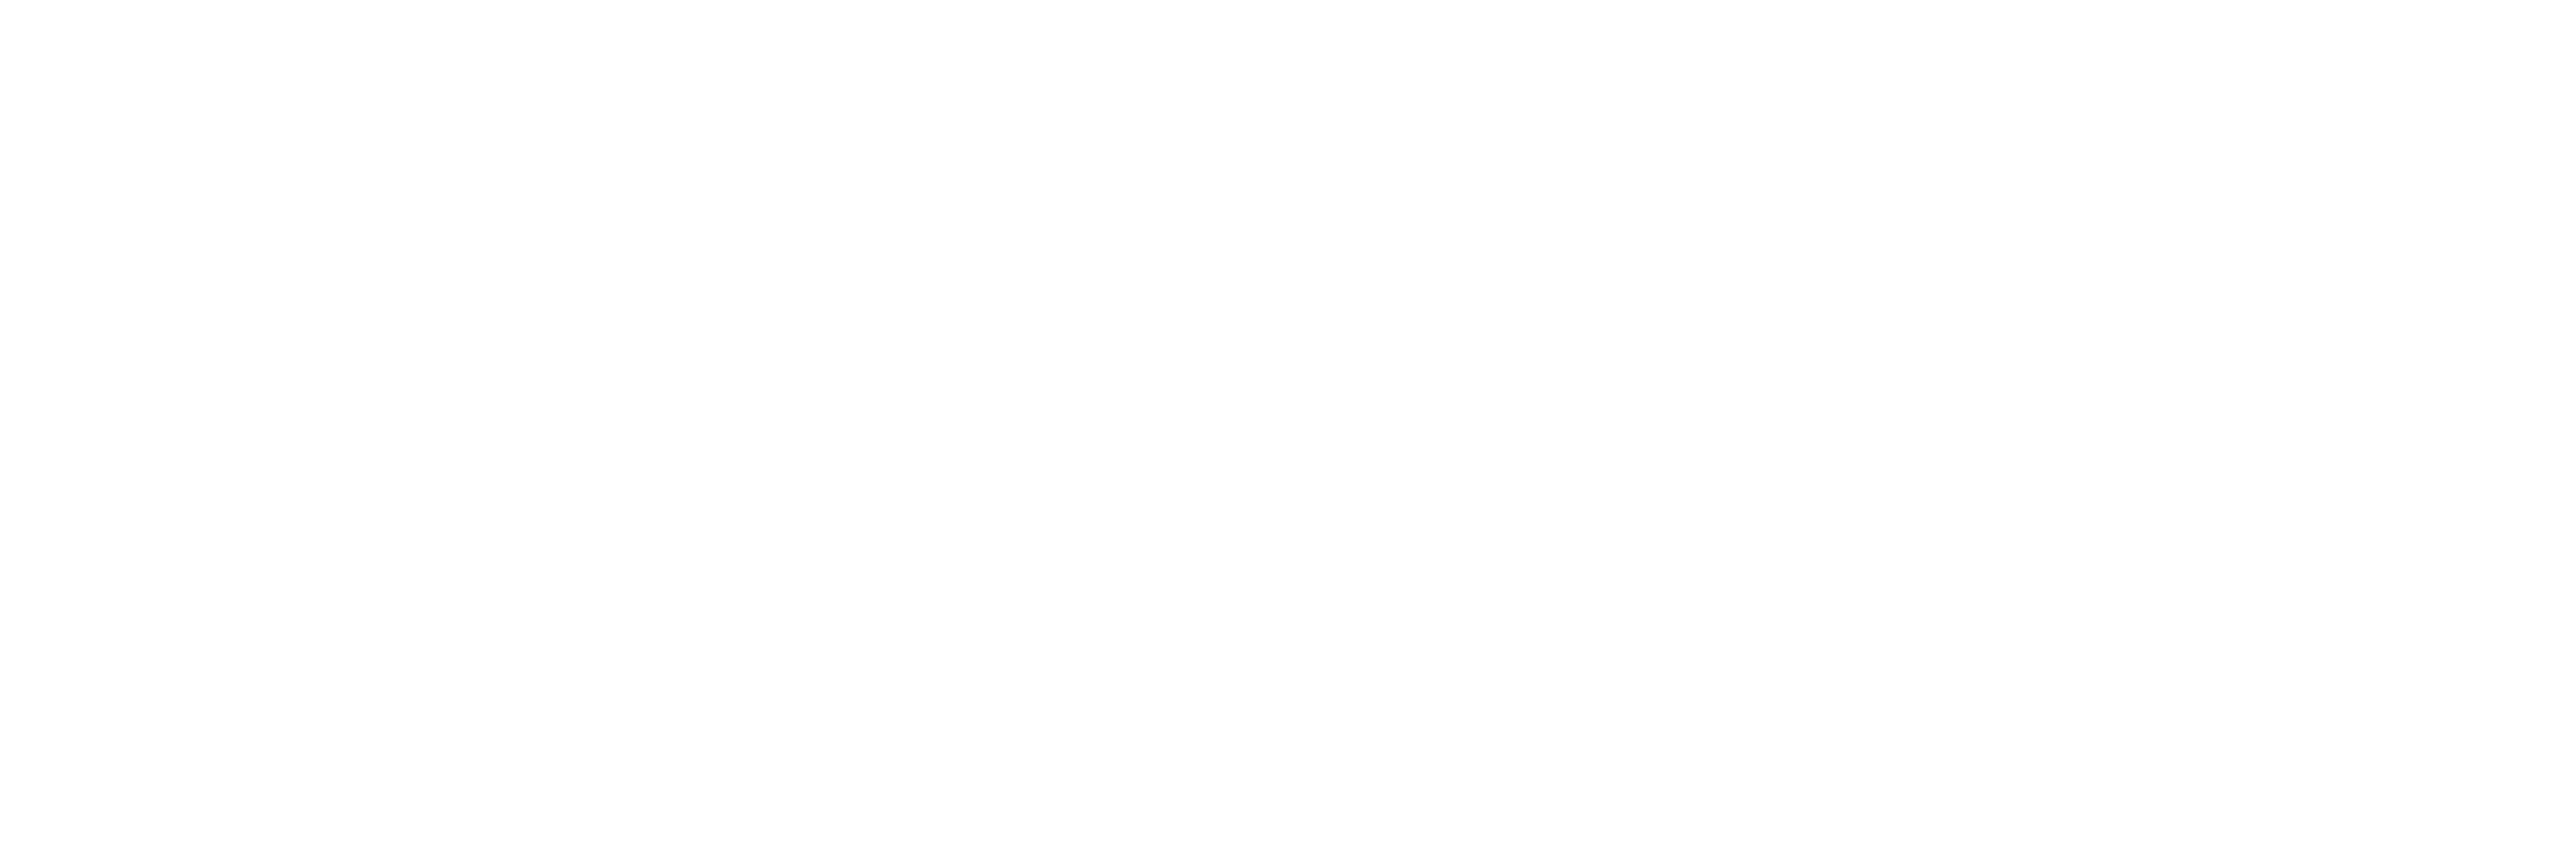 Who Do You Think You Are? logo